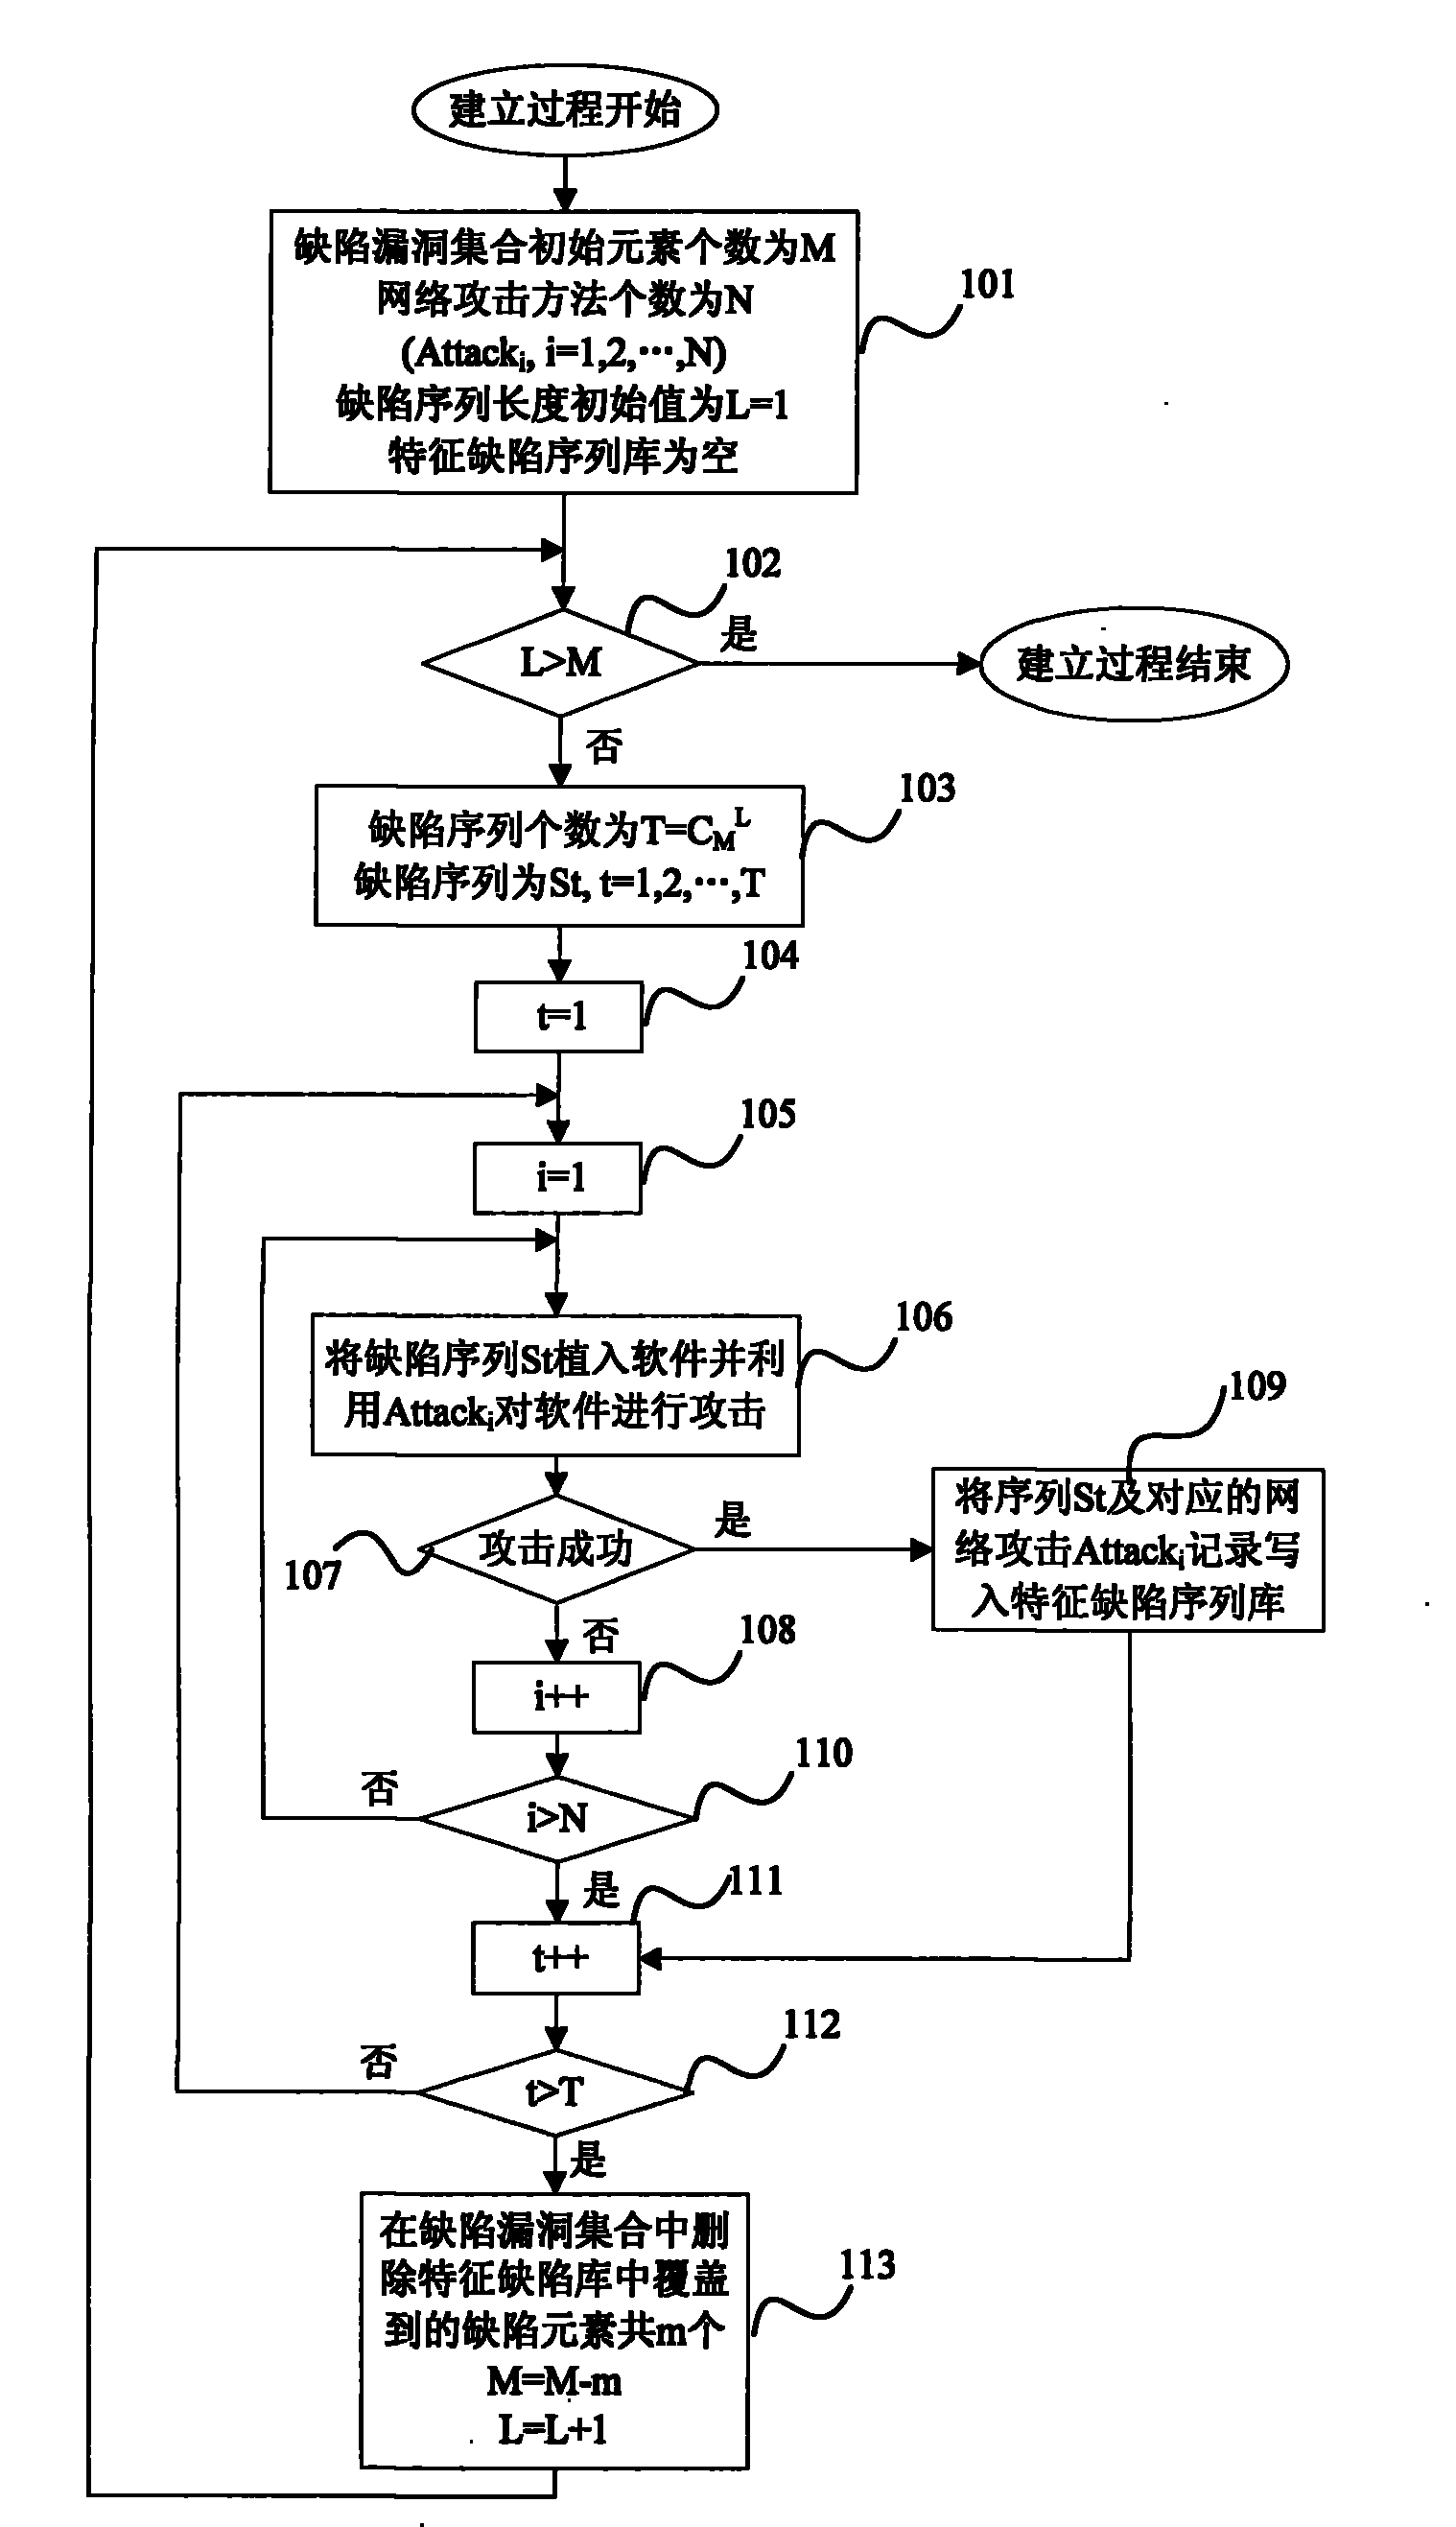 Method for prewarning aggression based on software defect and network aggression relation excavation